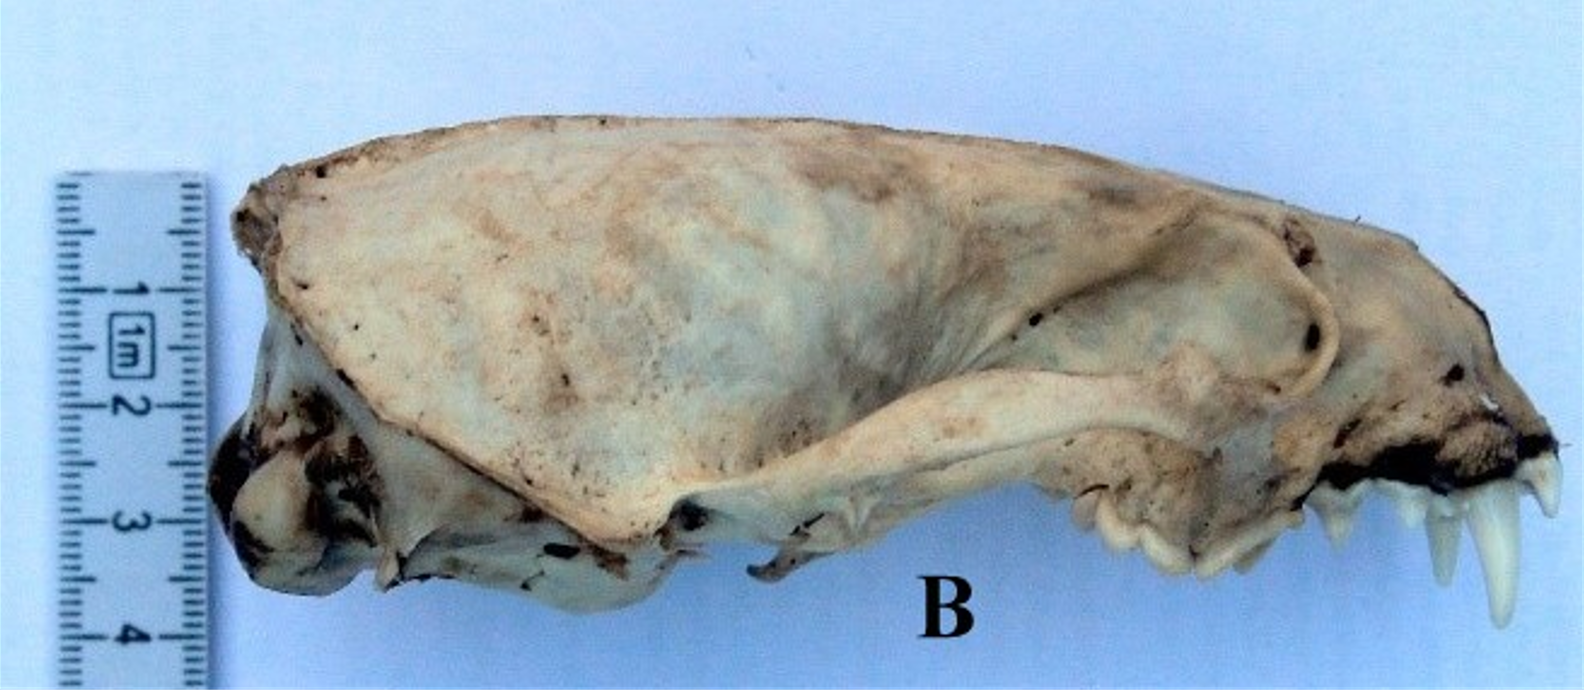 The cleaned skull specimen in this study with a markedly longer snout. 